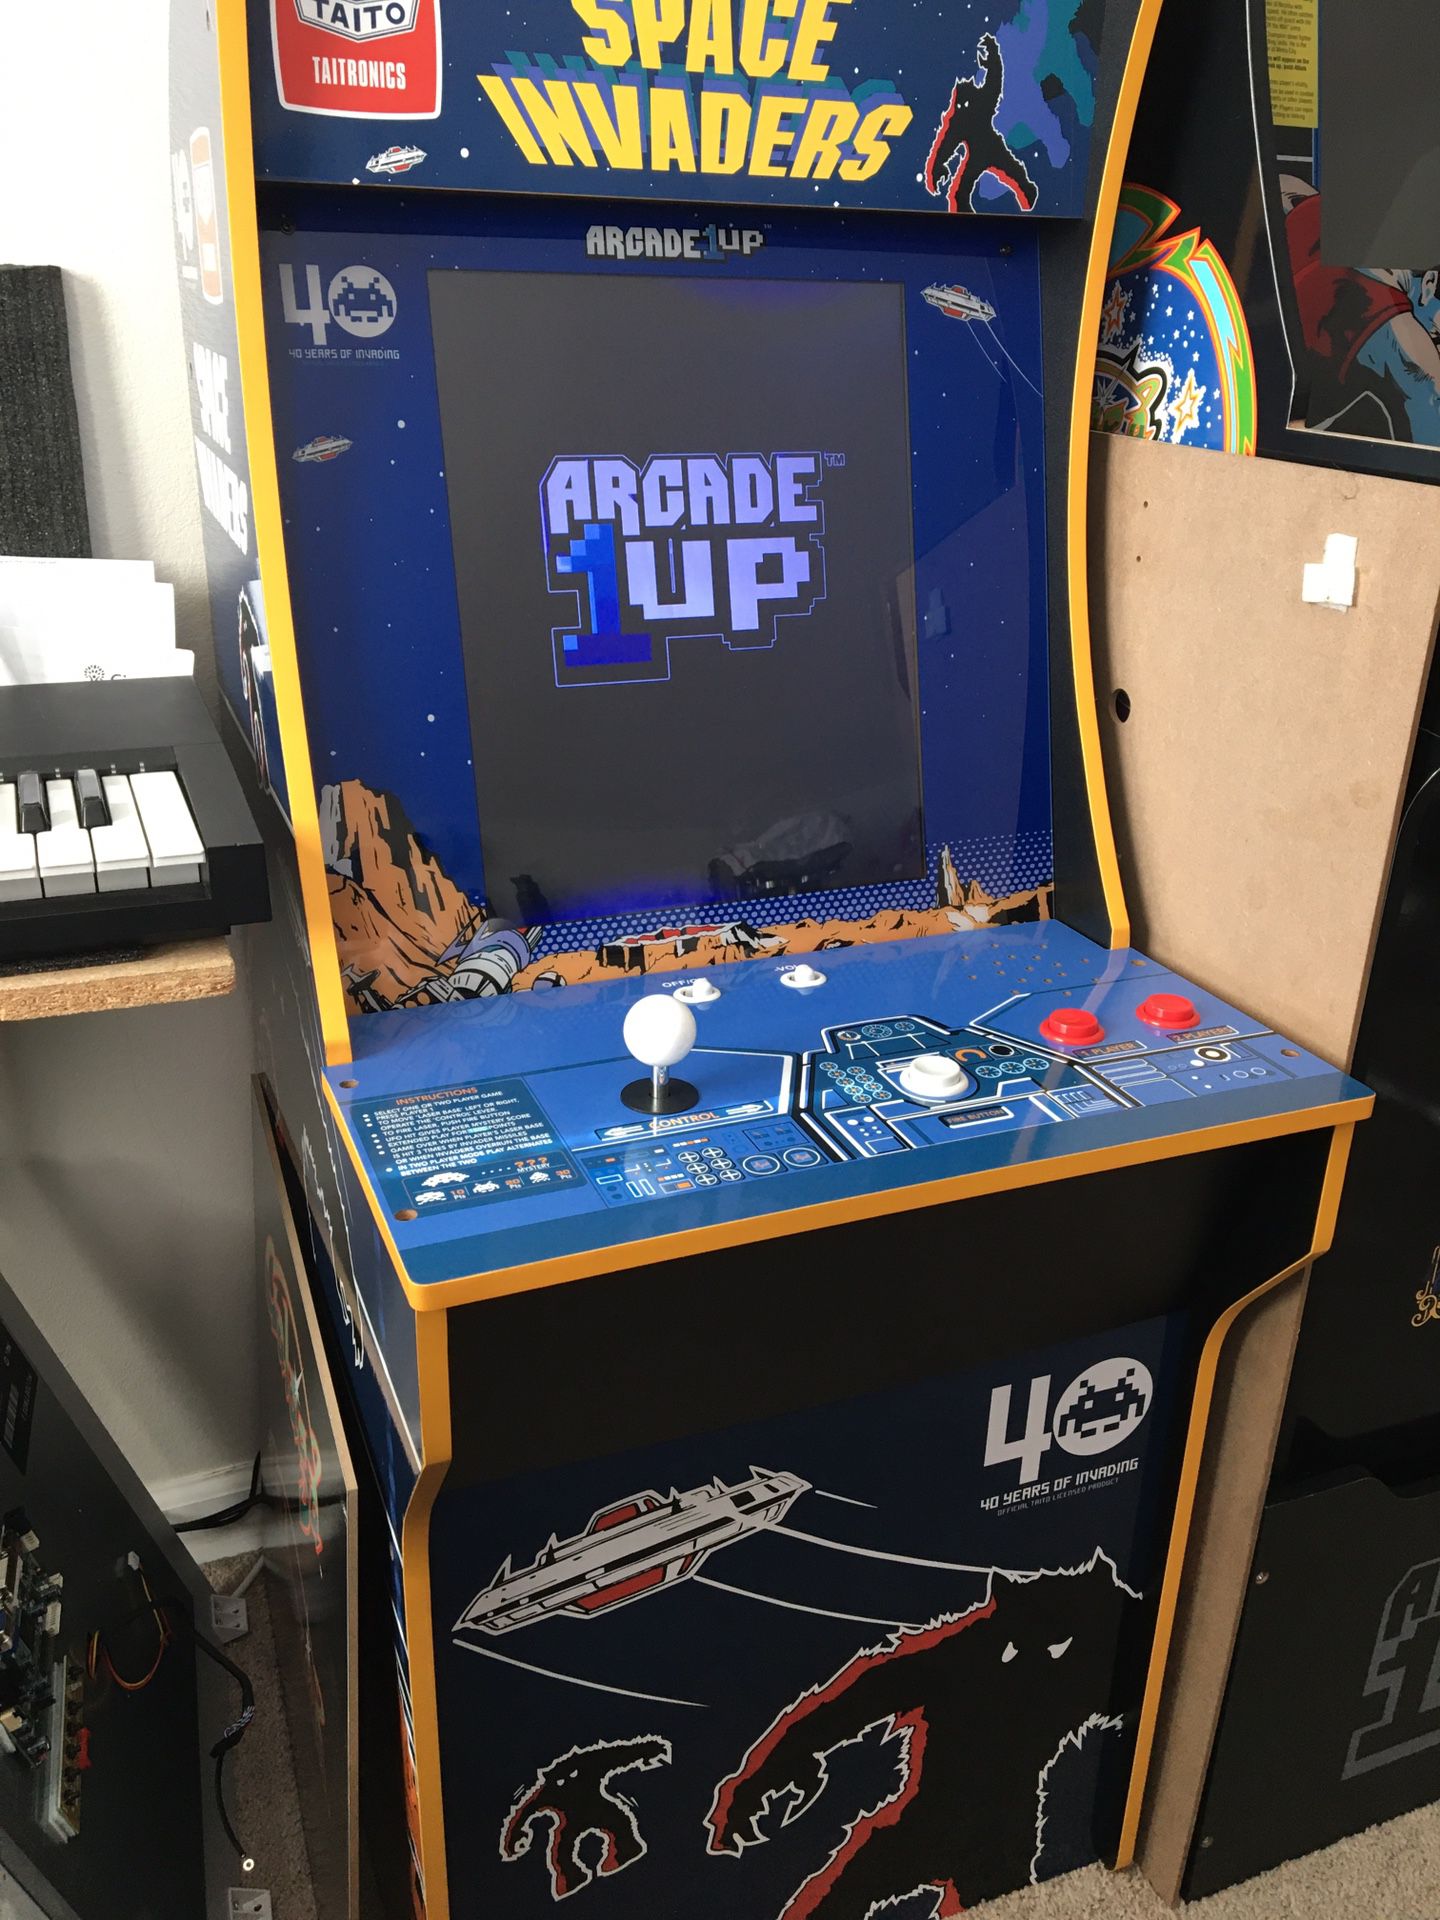 Space invaders 1up arcade cabinet